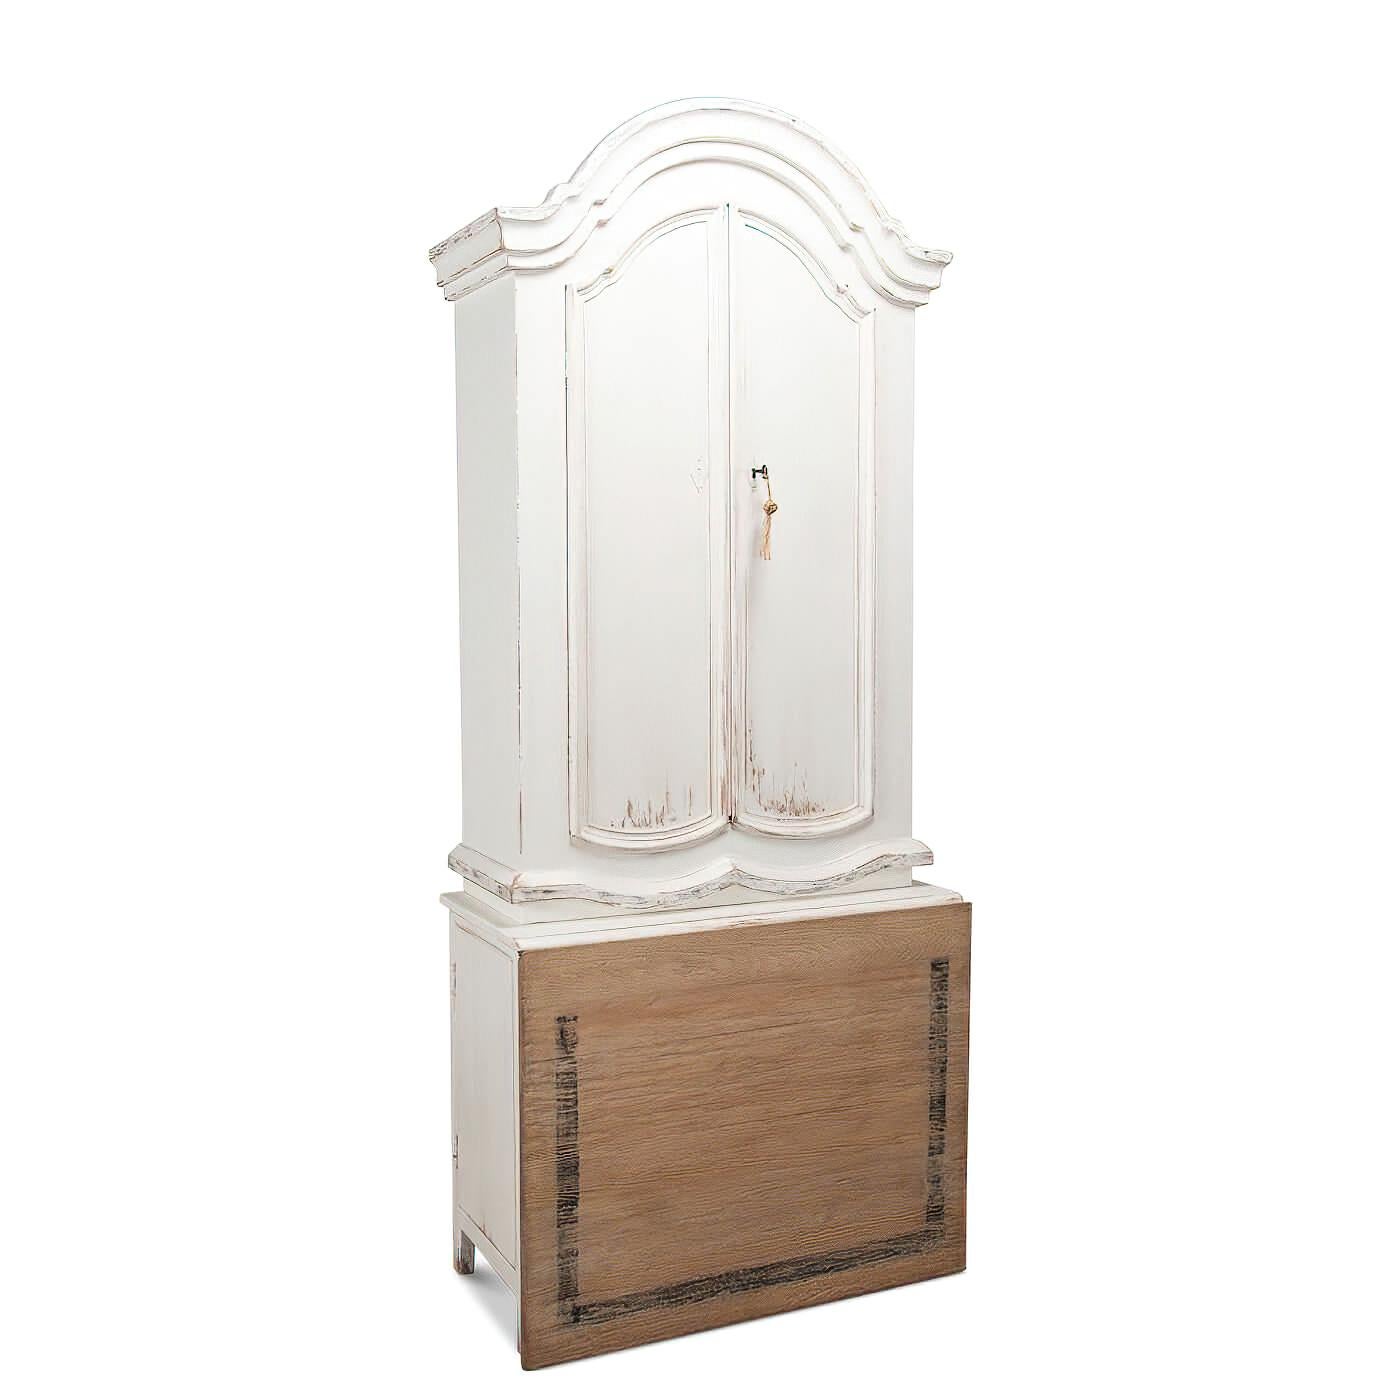 A French Country-style white washed painted secretary bookcase with an unusual folding writing surface that can convert to a table. It features a beautiful molded bonnet at the top. The upper cabinet has adjustable shelves and the sides of the